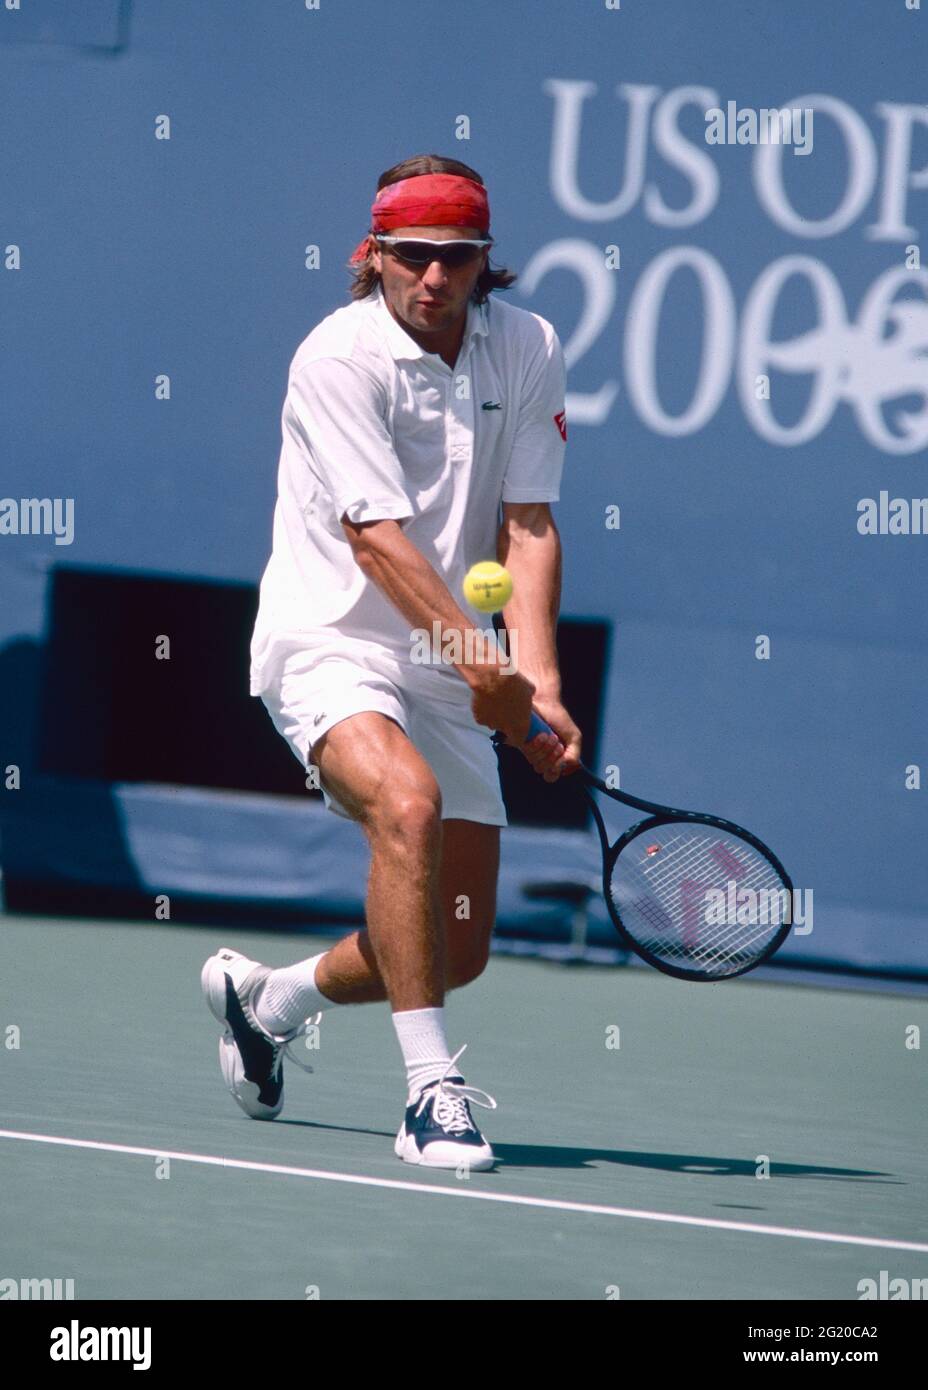 French tennis player and Davis Cup captain Arnaud Clement, US Open 2000  Stock Photo - Alamy